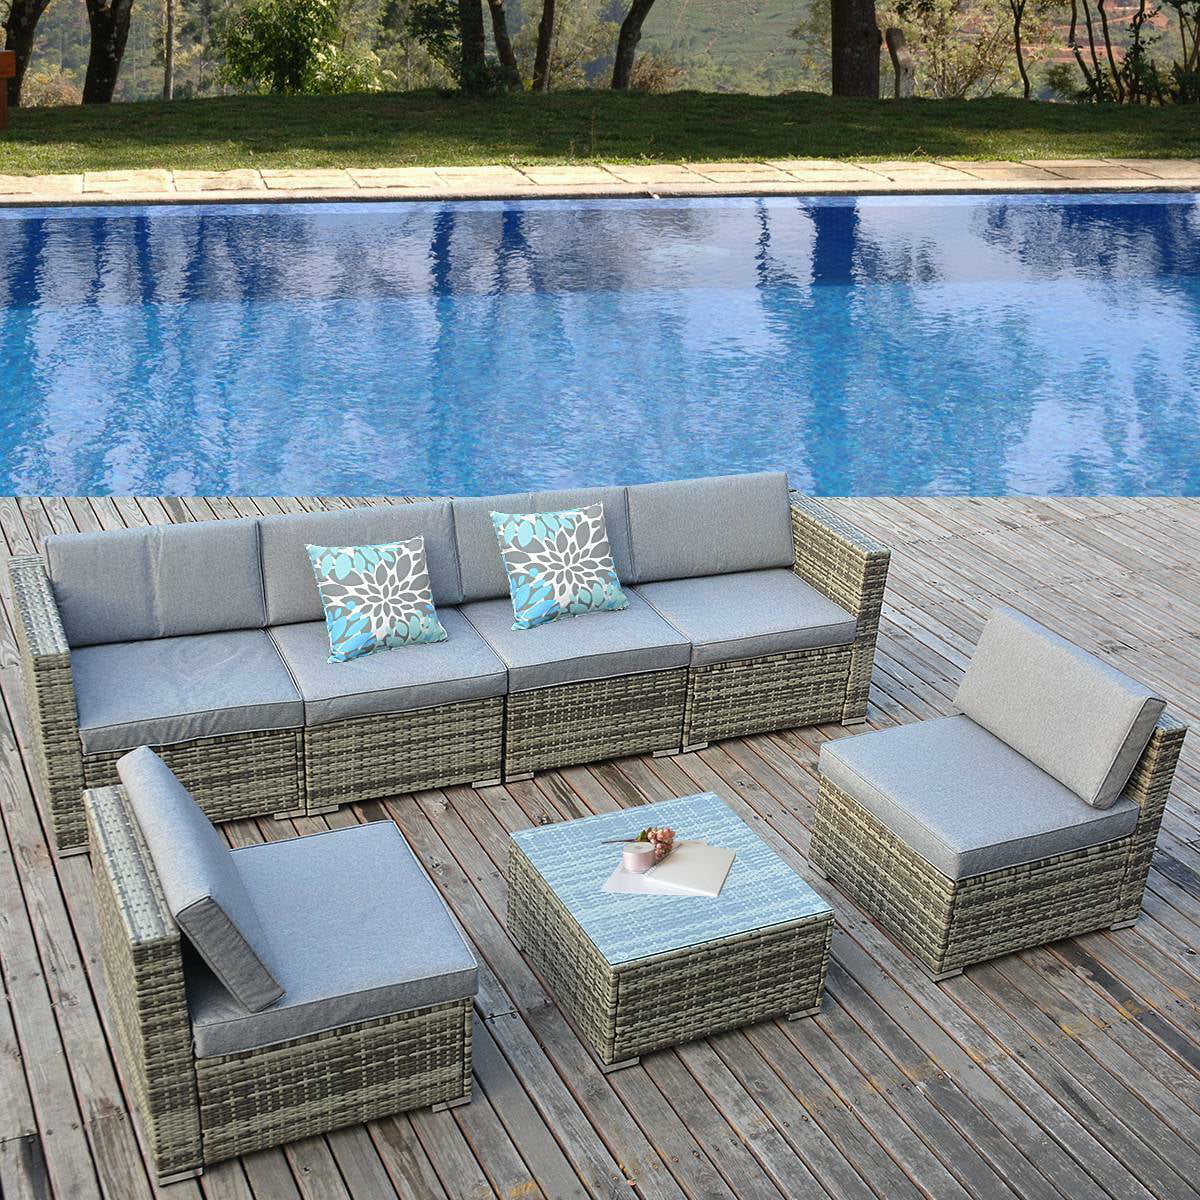 7 Piece Outdoor Patio Sofa Rattan Wicker Chair Sectional Furniture Set W/ Coffee Table &amp;Cushion for Lawn, Backyard, and Poolside